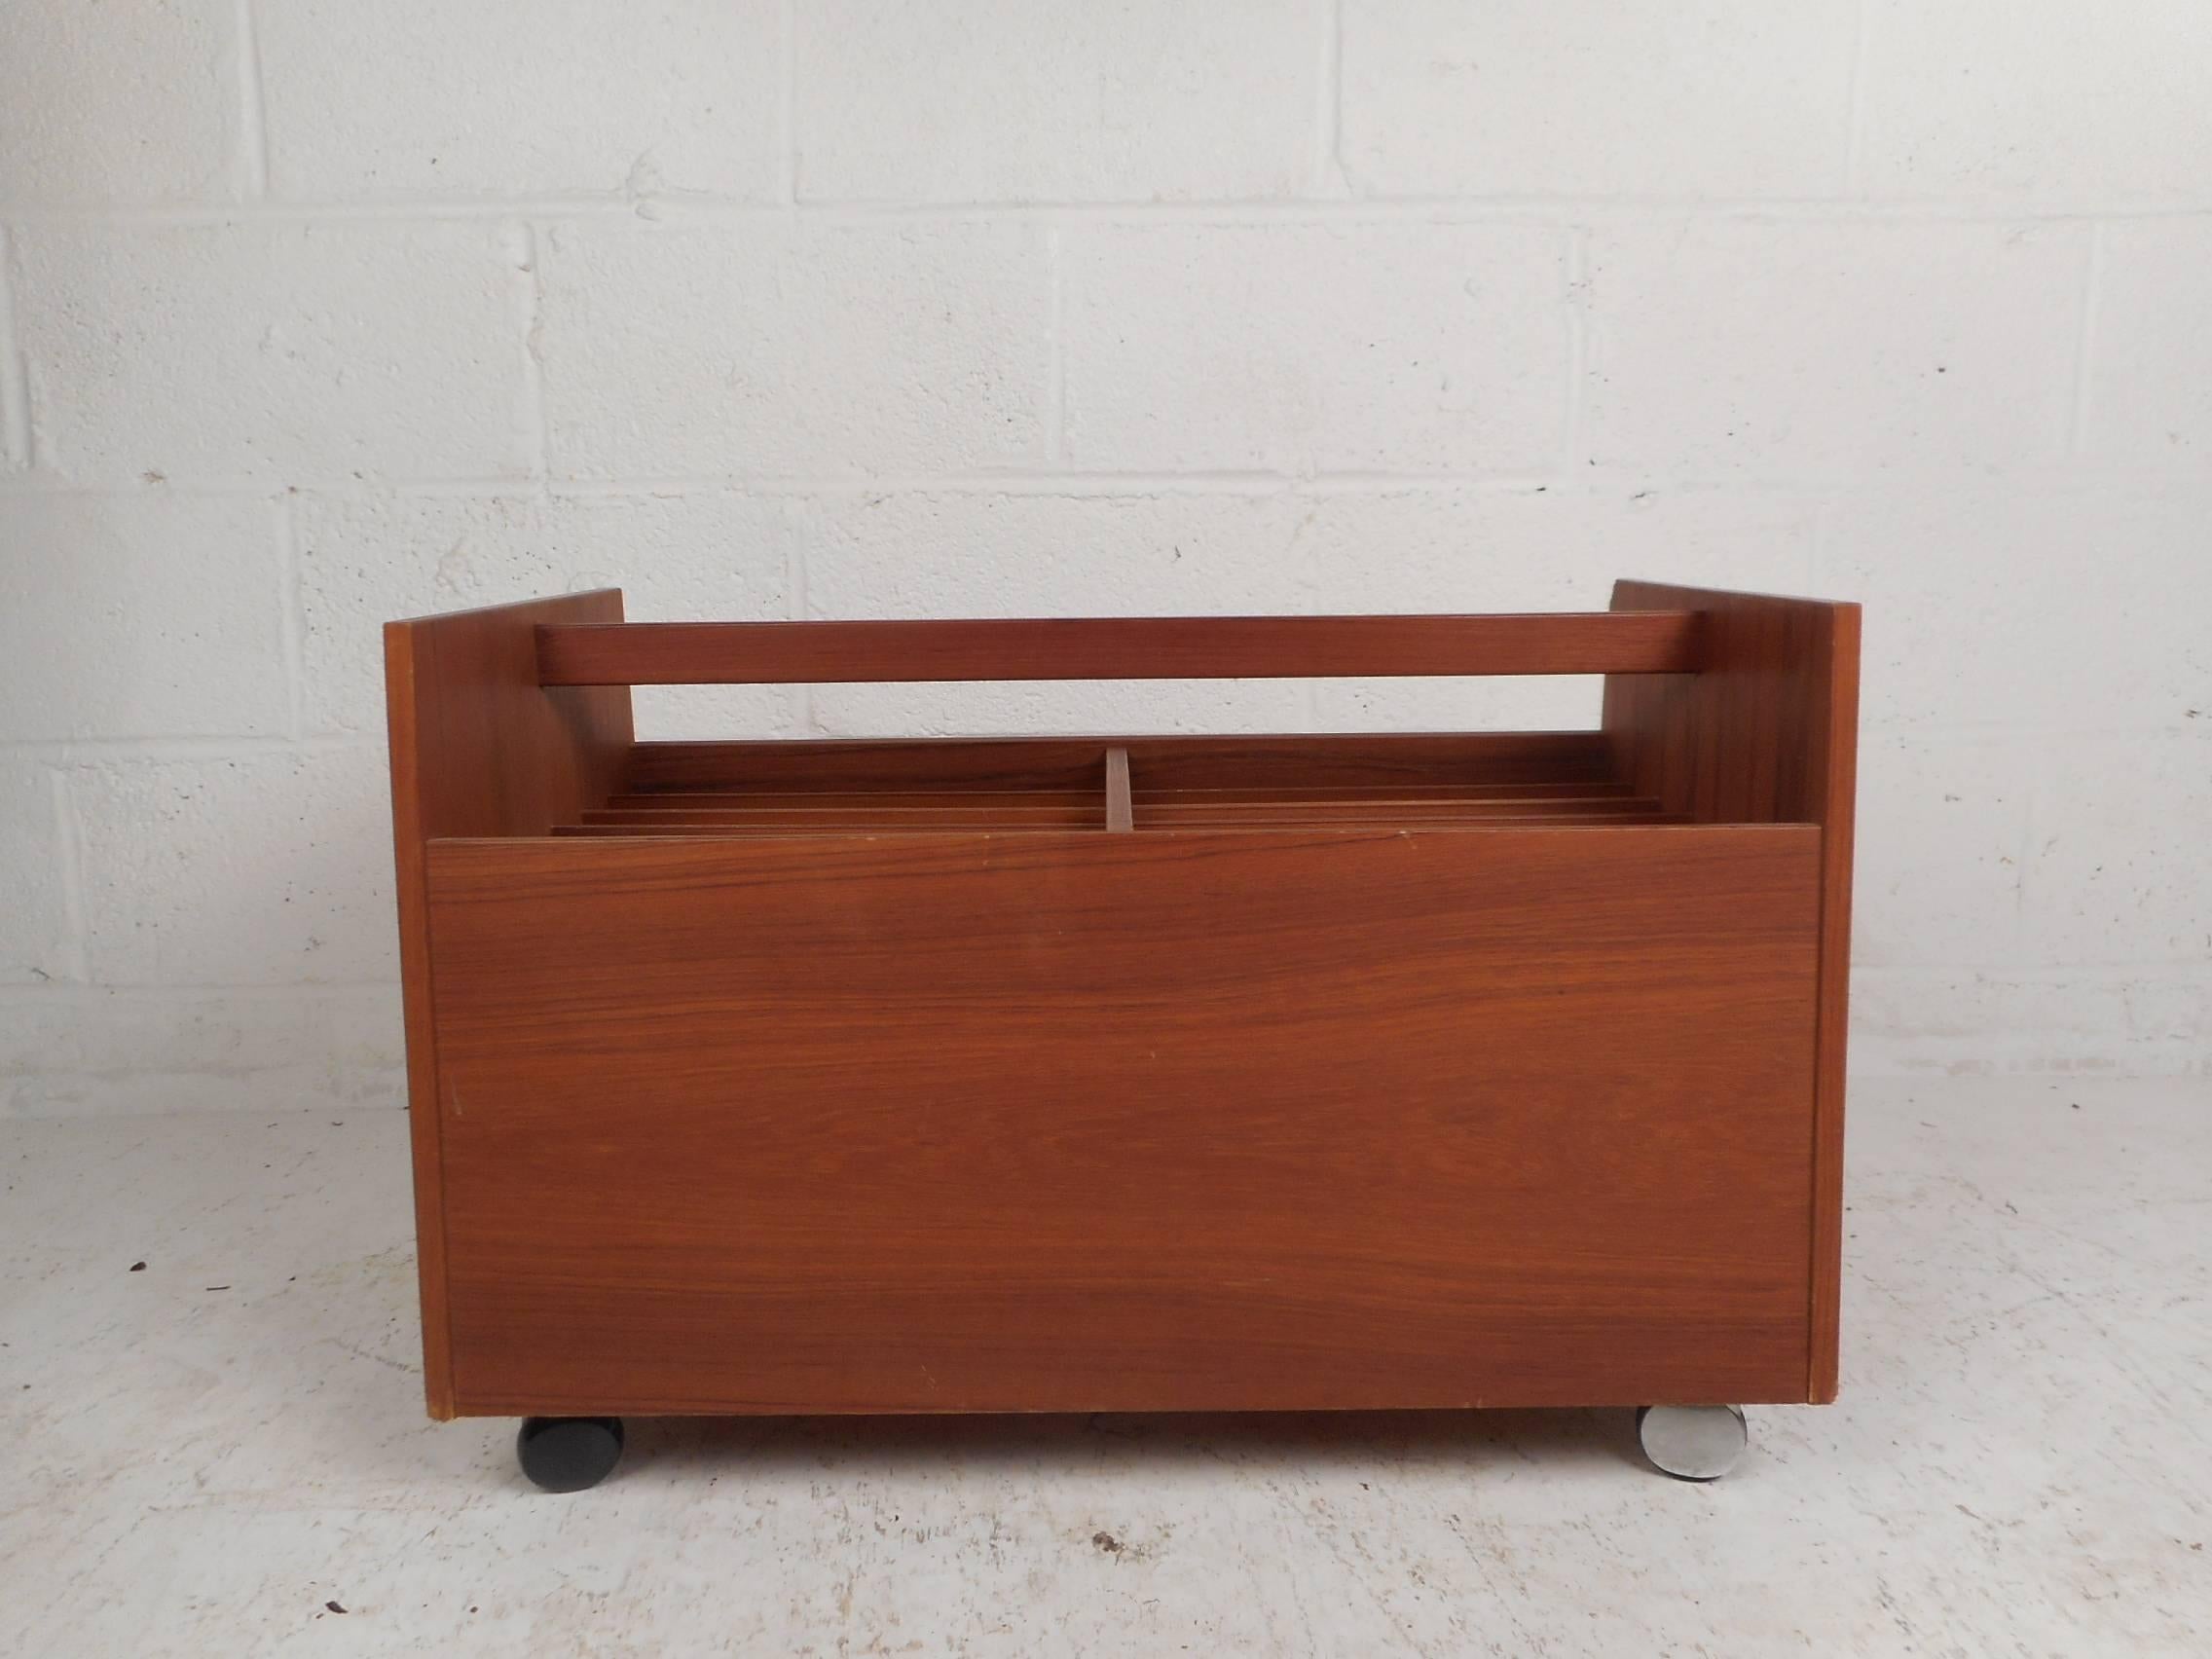 This gorgeous vintage modern magazine rack sits on top of four castors and has plenty of space within to store items. Stylish design with a convenient handle and elegant teak wood grain. This fabulous mid-century piece makes the perfect addition to